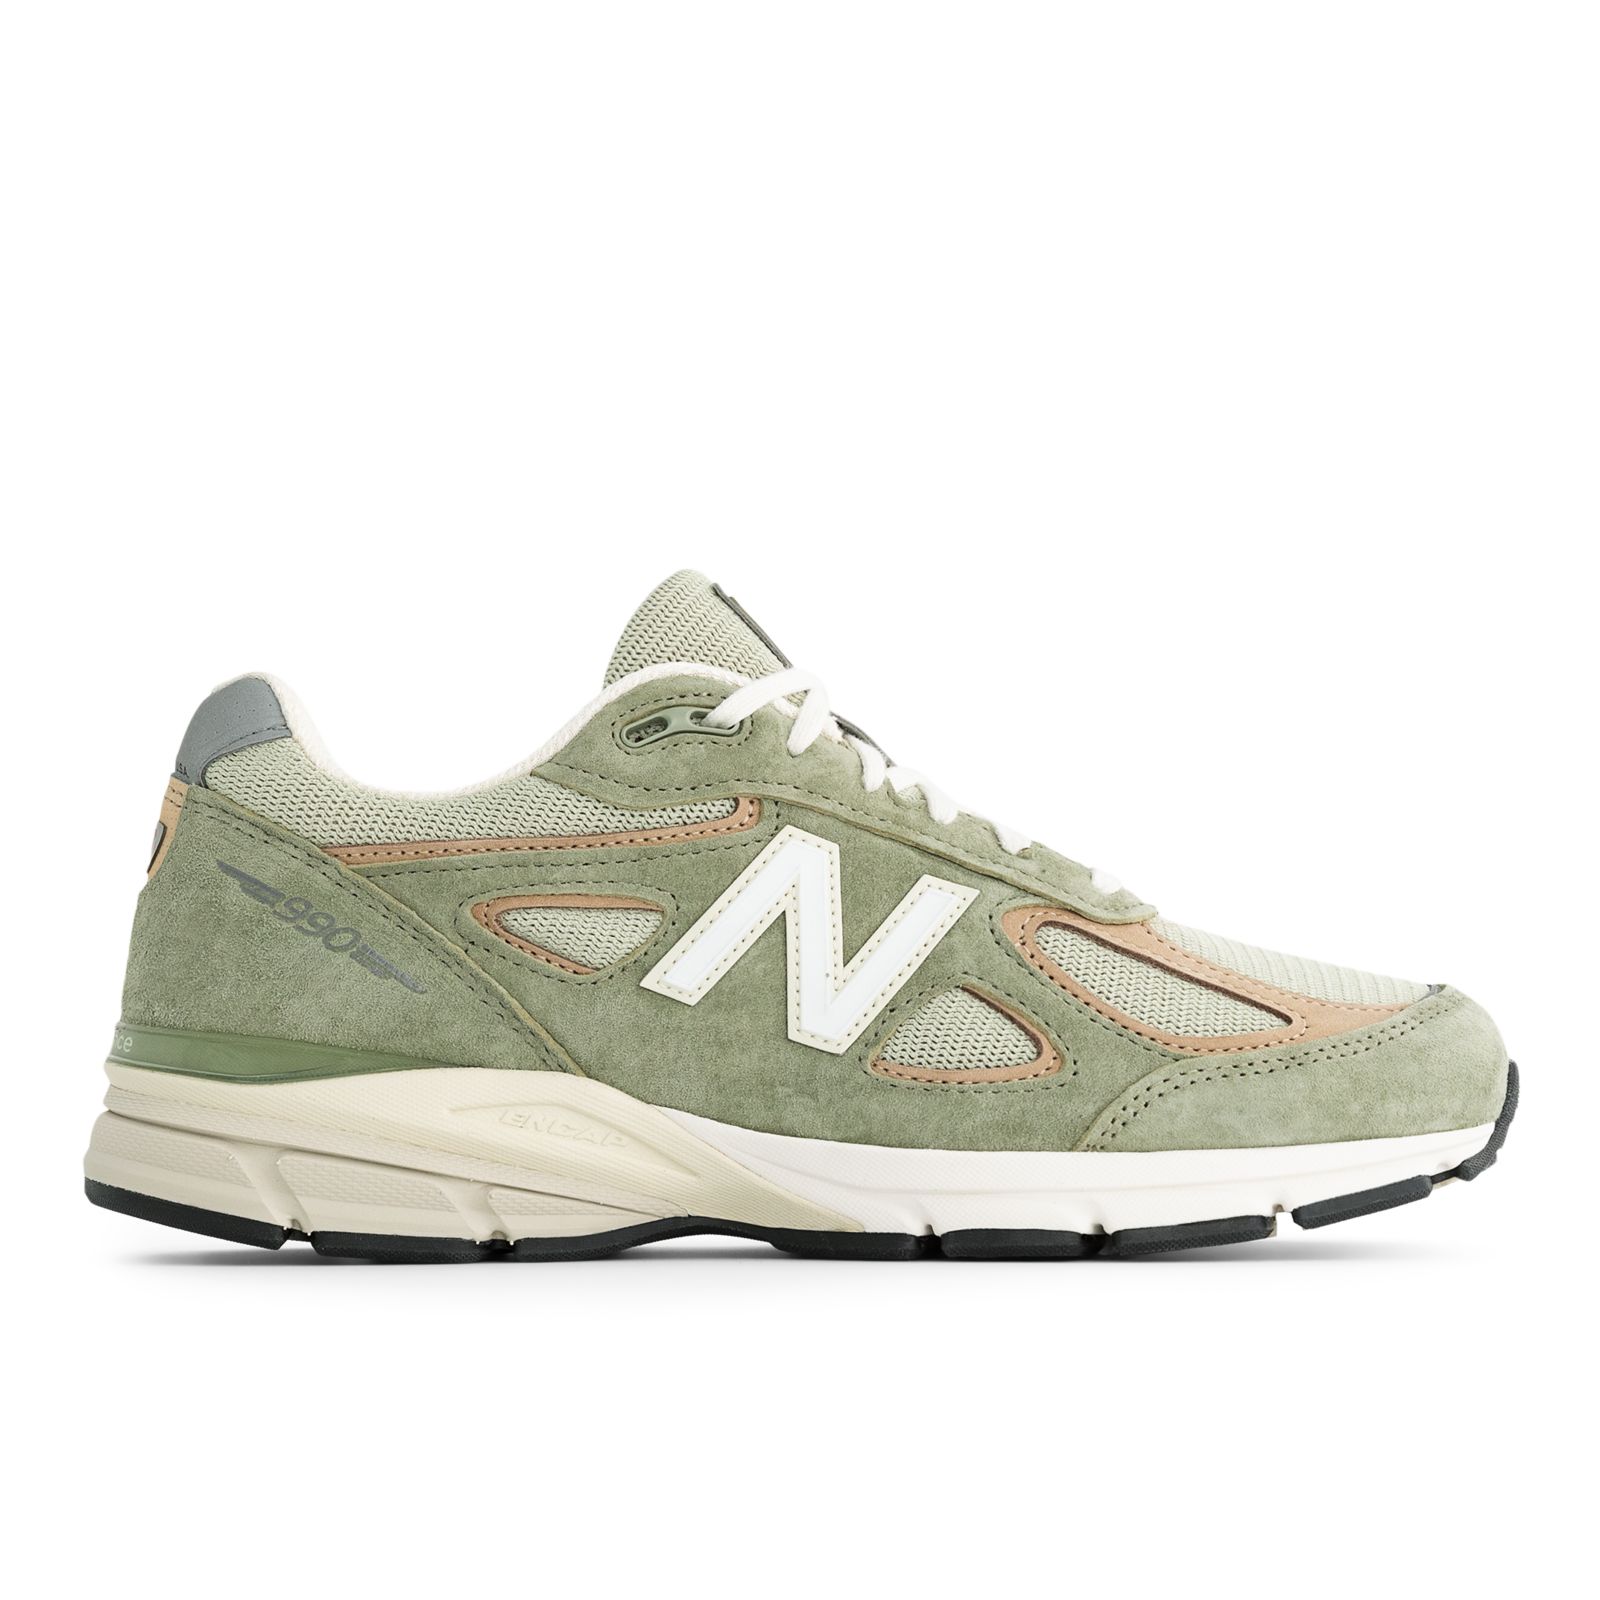 Unisex Made in USA 990v4 Shoes - New Balance